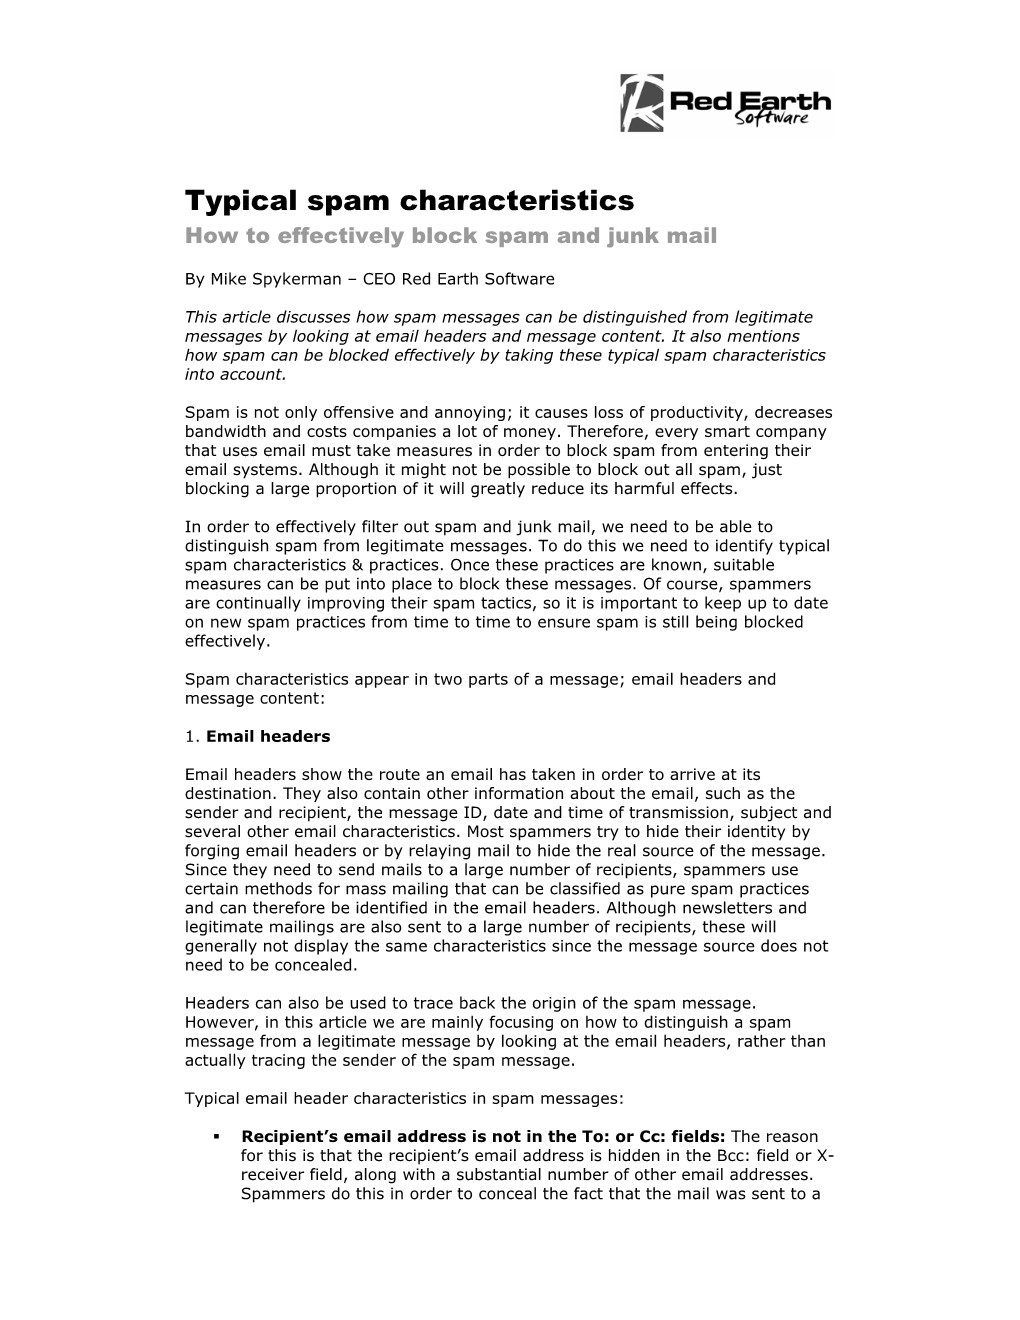 Typical Spam Characteristics How to Effectively Block Spam and Junk Mail